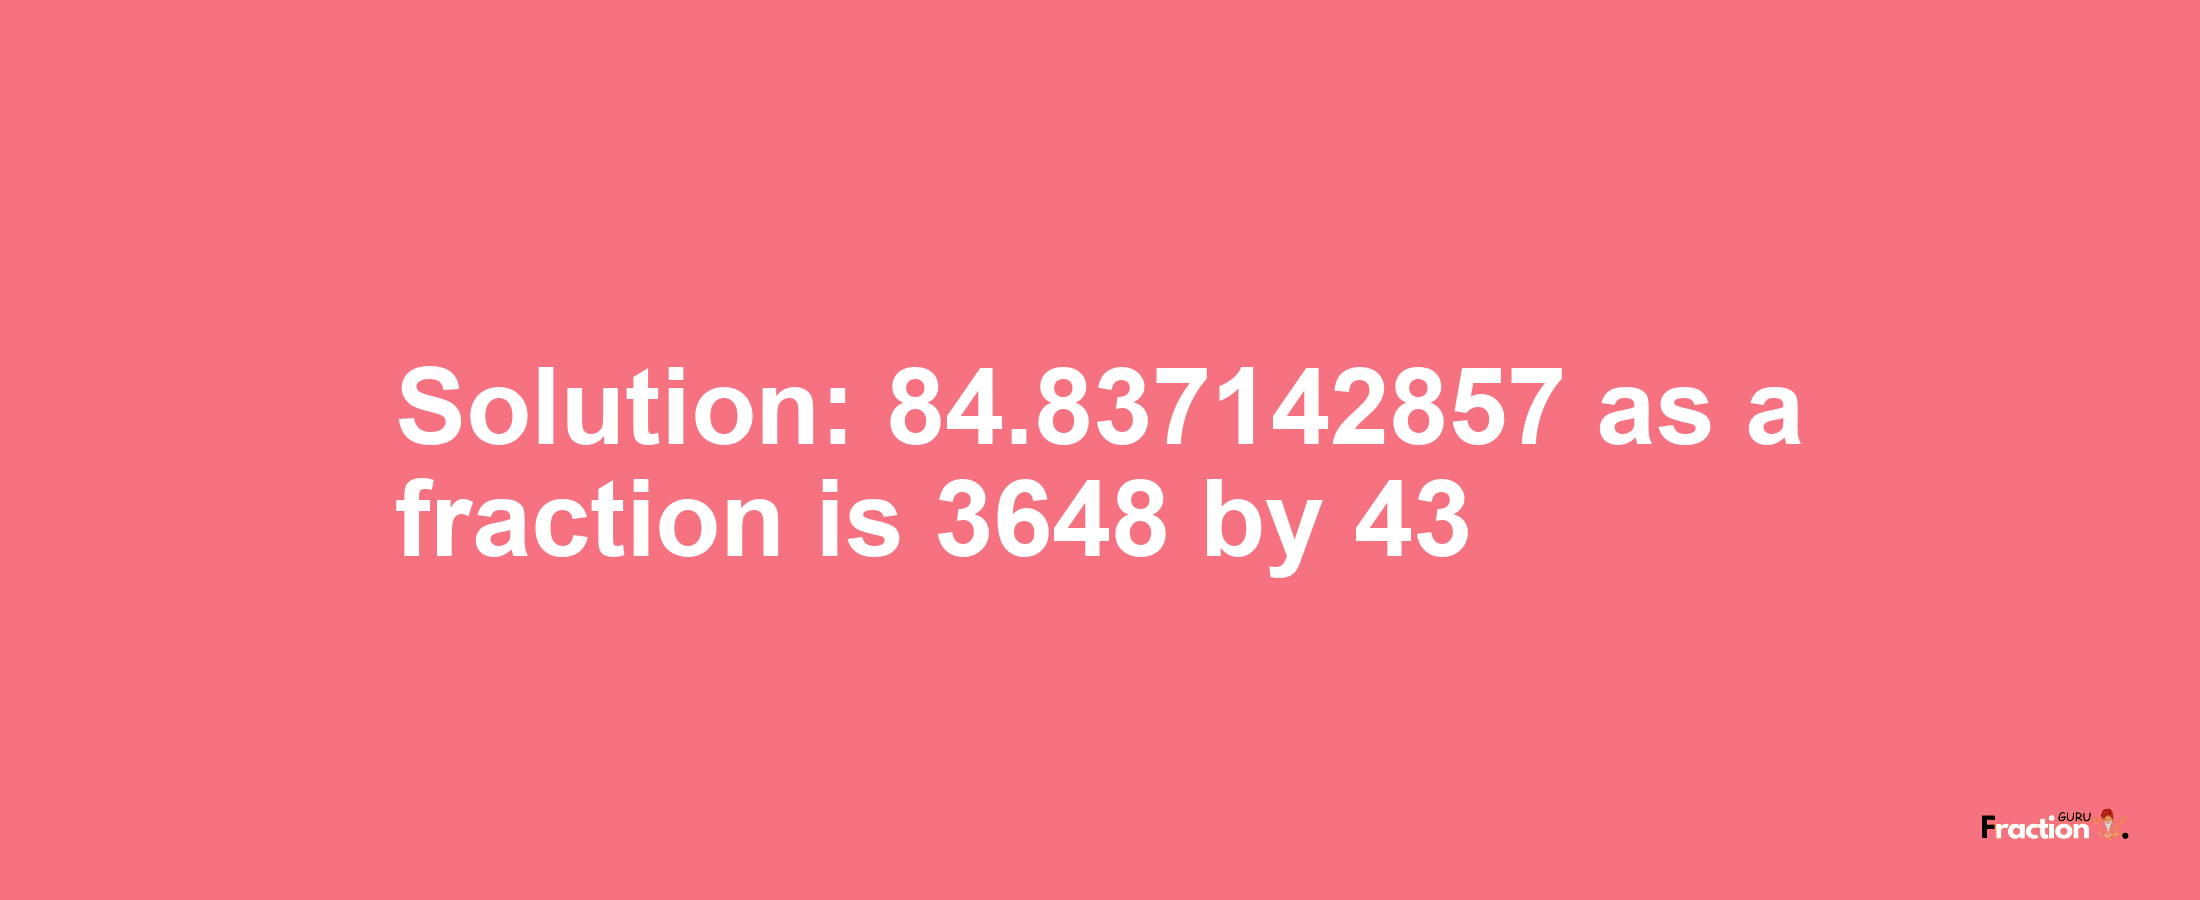 Solution:84.837142857 as a fraction is 3648/43